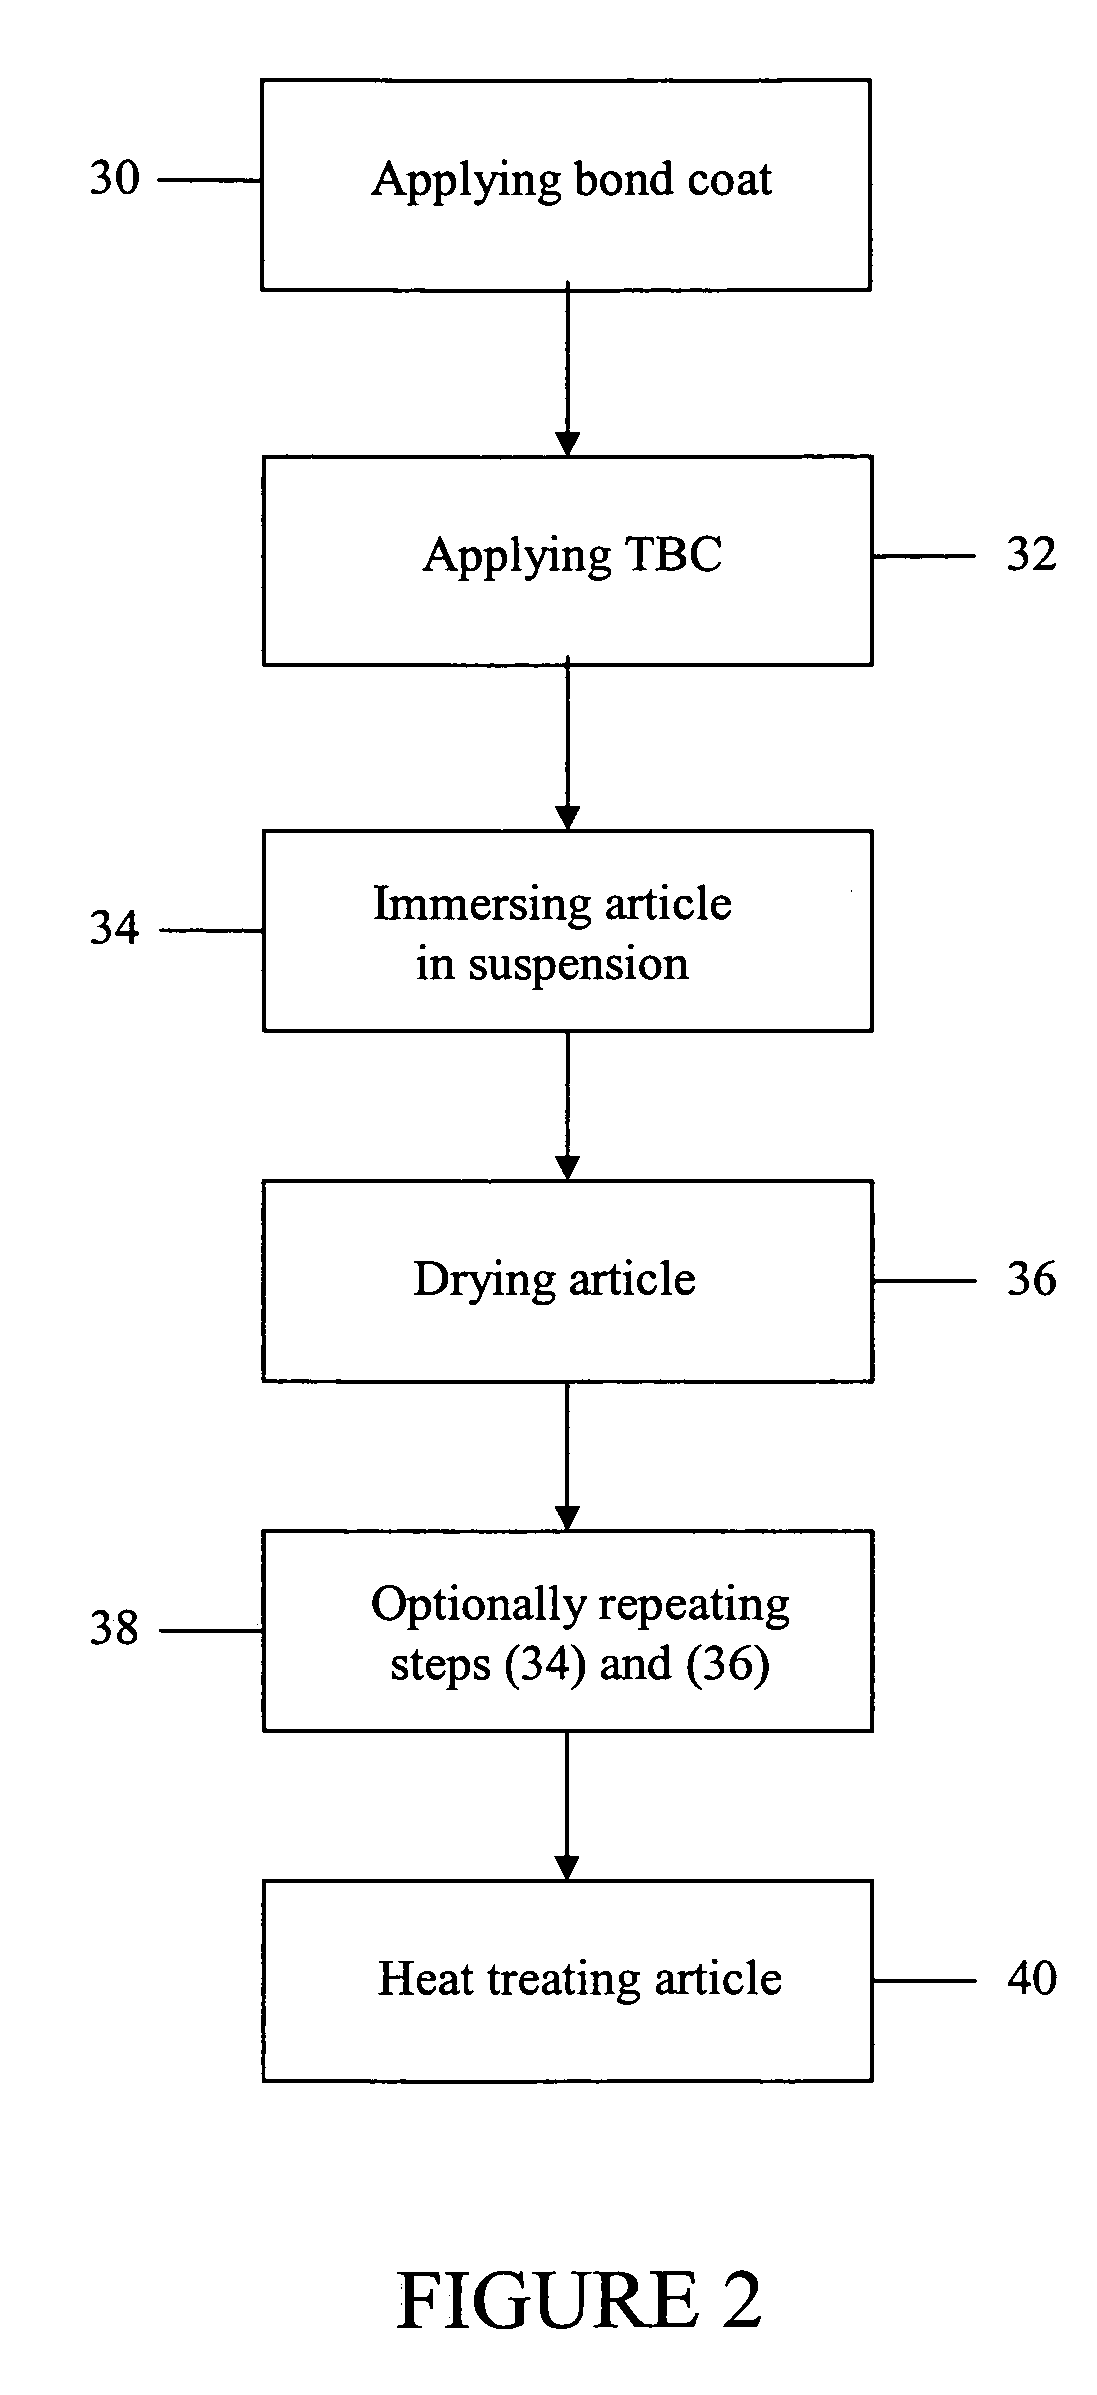 Thermal barrier coating compositions, processes for applying same and articles coated with same